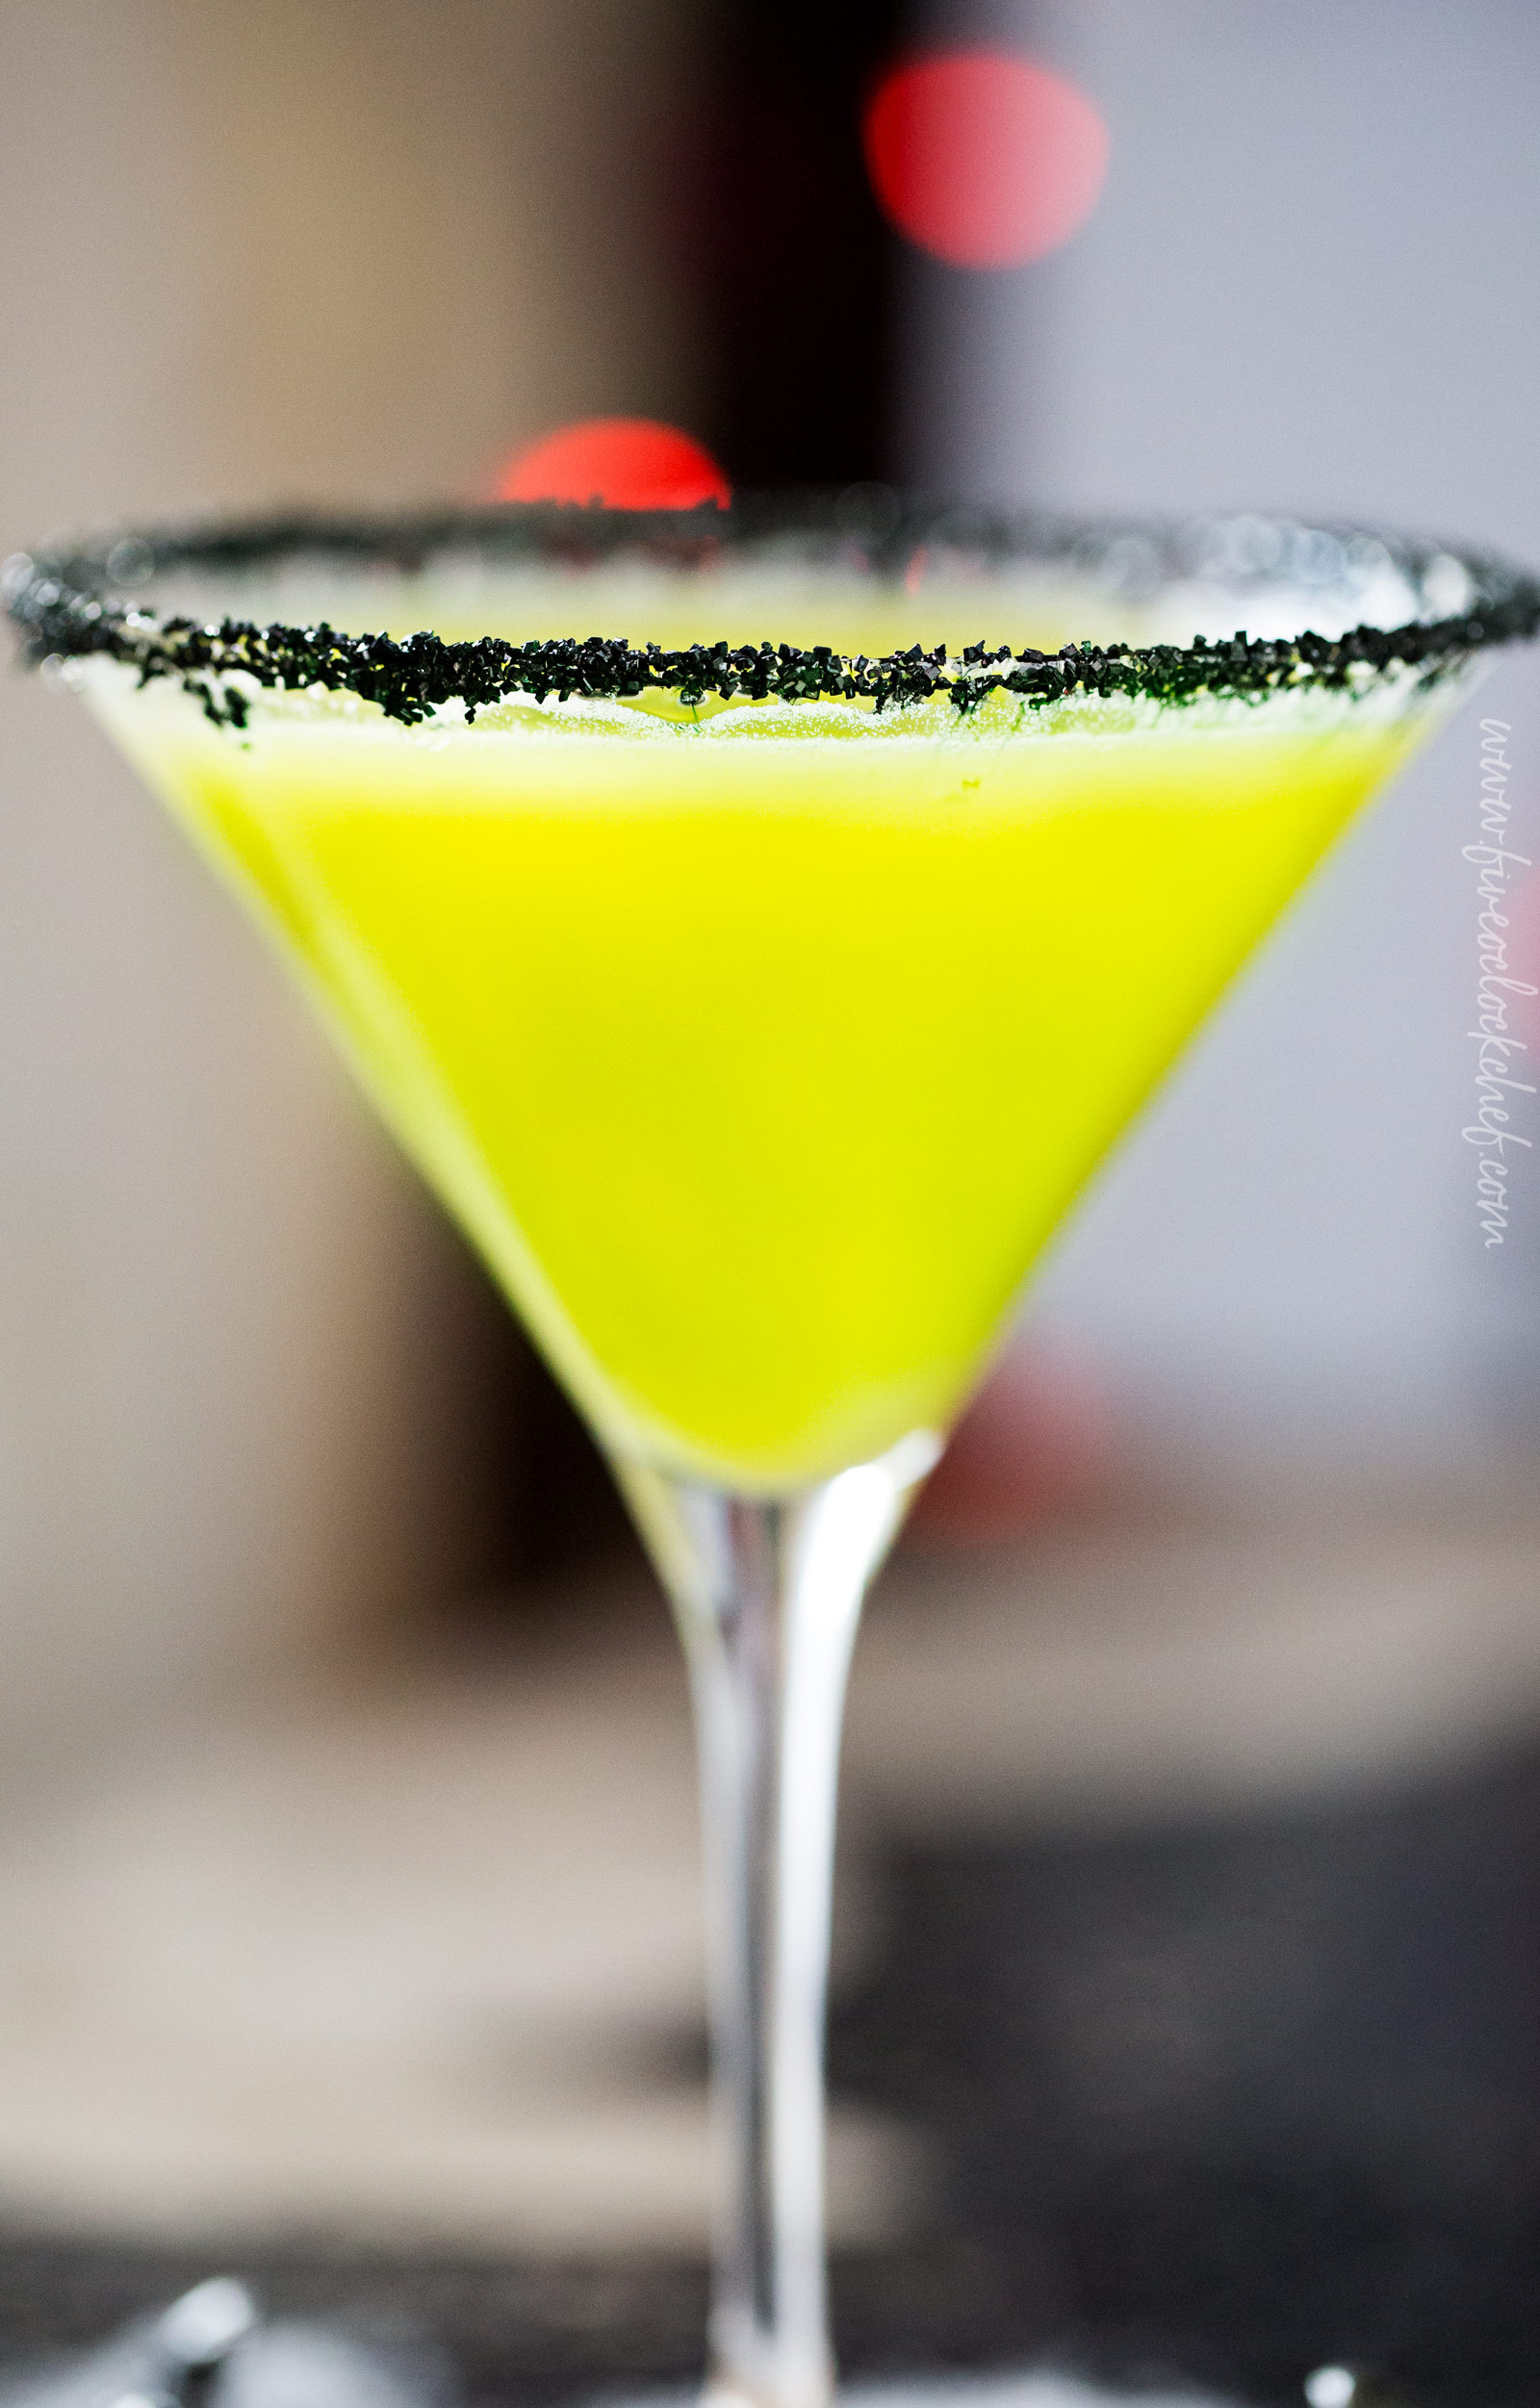 Witches Brew Halloween Cocktail | Sweet and mysterious, this Halloween cocktail practically glows with an eerie greenish color! Made with just 3 simple ingredients, it's a must make for any party! | https://www.the5oclockchef.com | #cocktail #halloween #witch #partydrink #midori